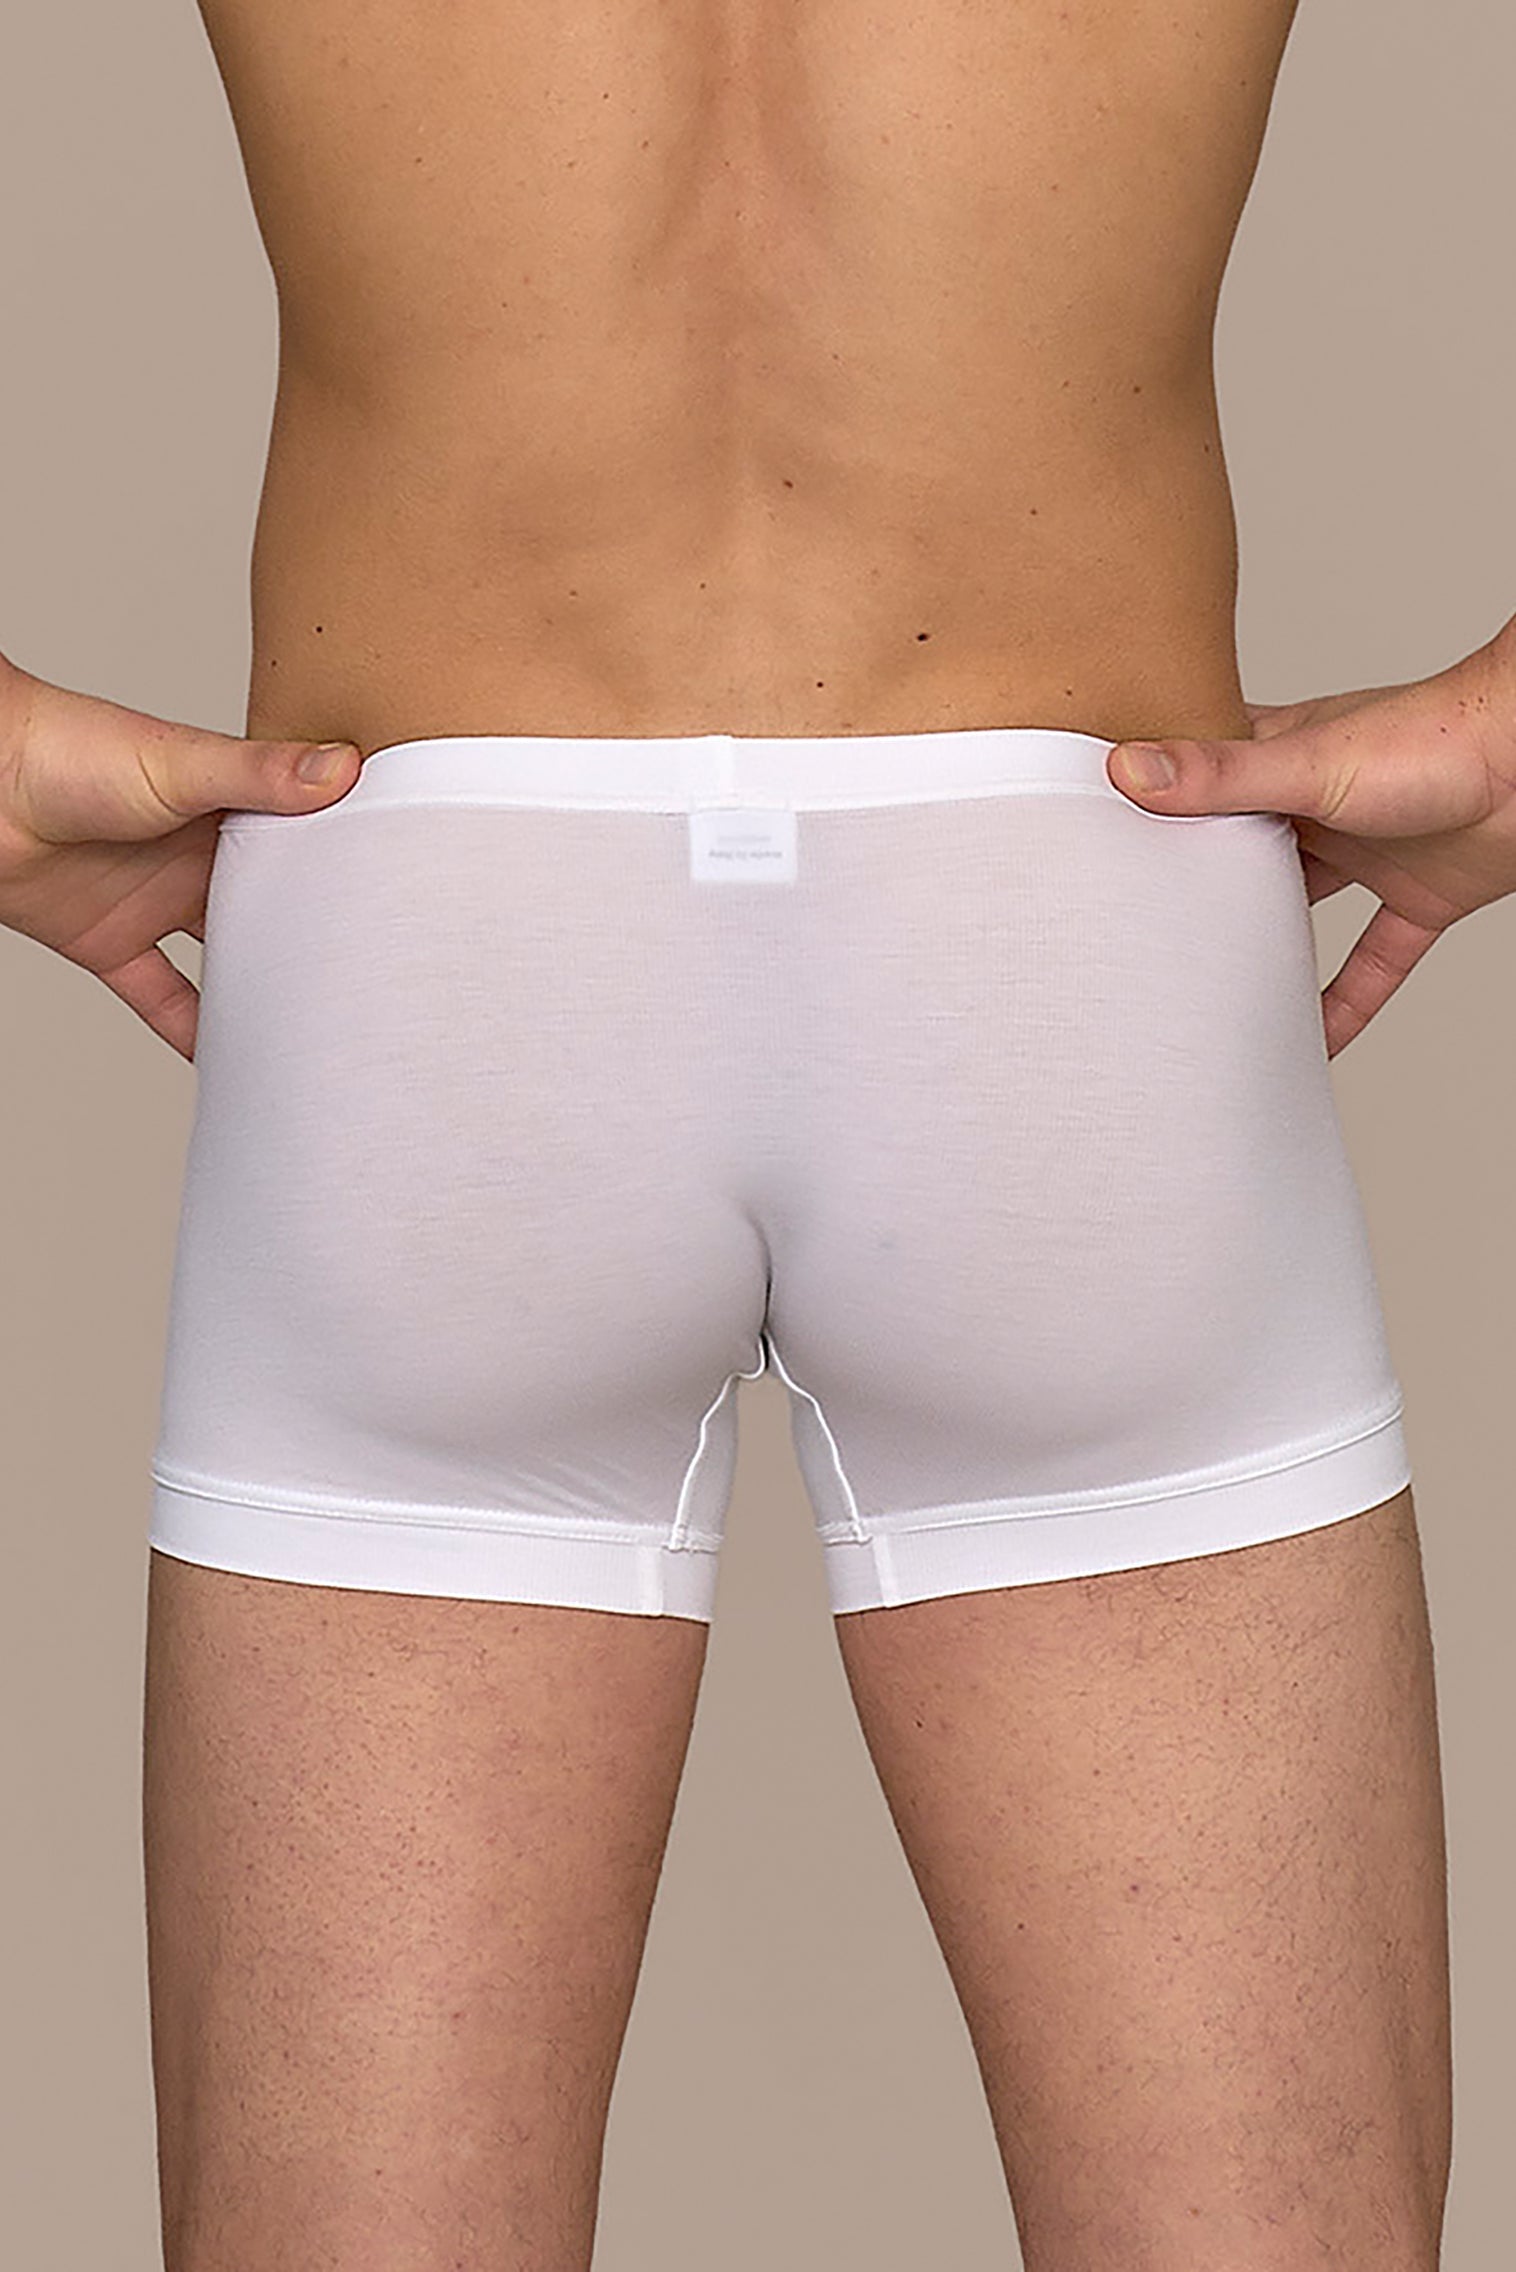 Boxer briefs / underpants in white made of natural MicroModal